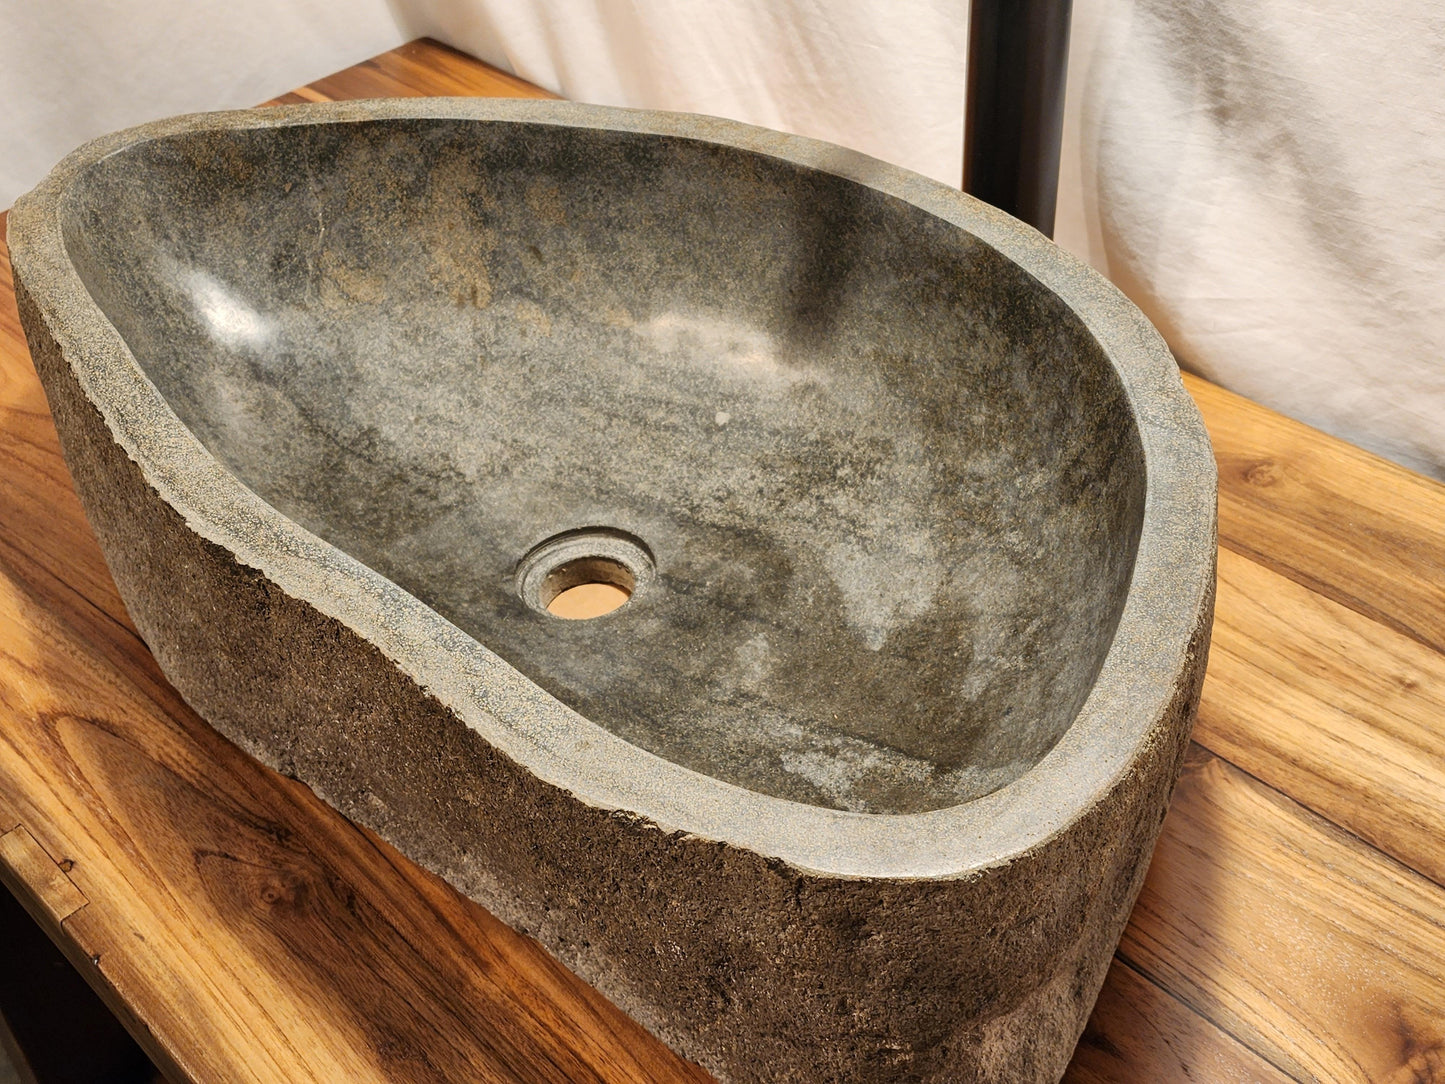 Andesite Natural Stone Vessel Sink, AND3 - Impact Imports